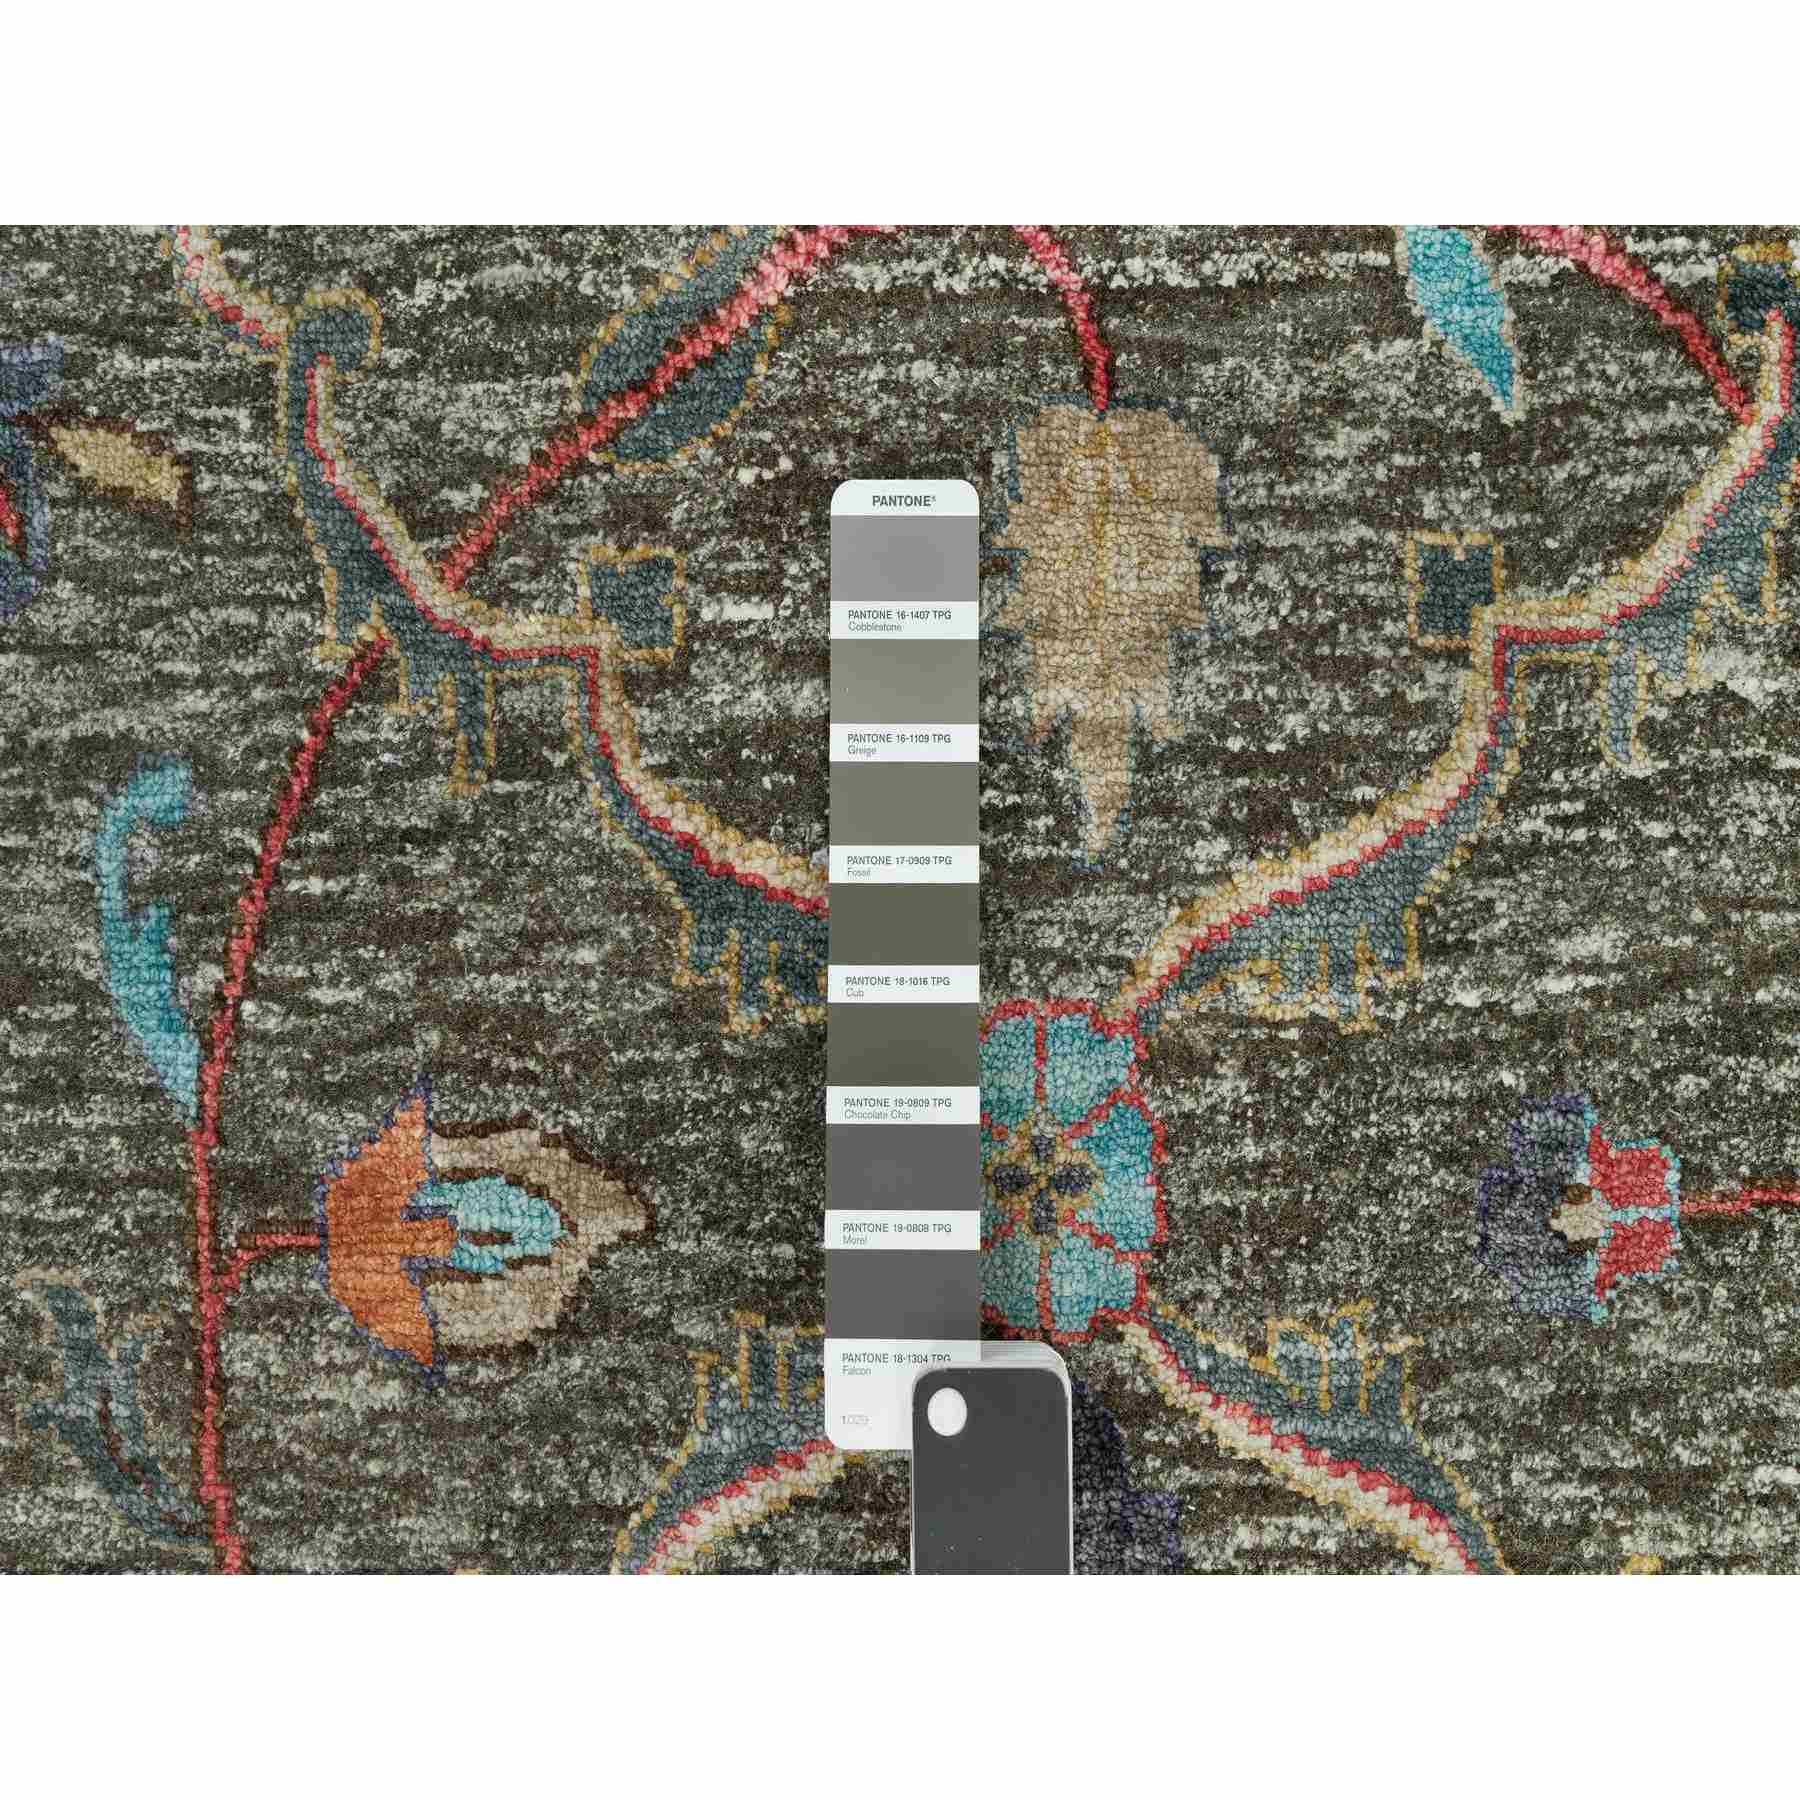 Transitional-Hand-Knotted-Rug-451105